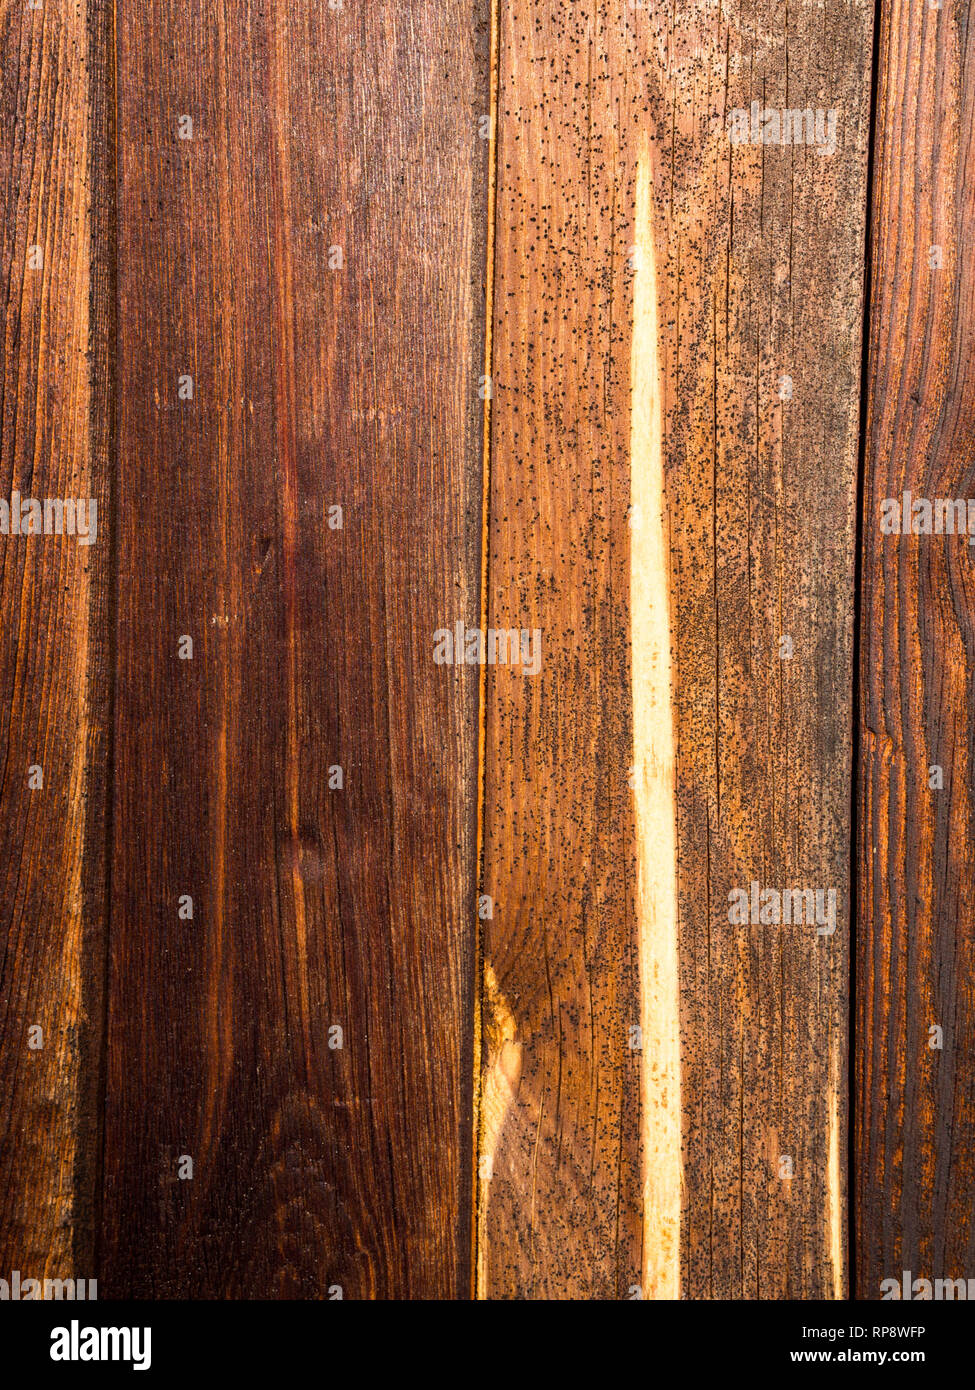 Old Rustic Wood With Mold Or Fungal On Top Background Texture